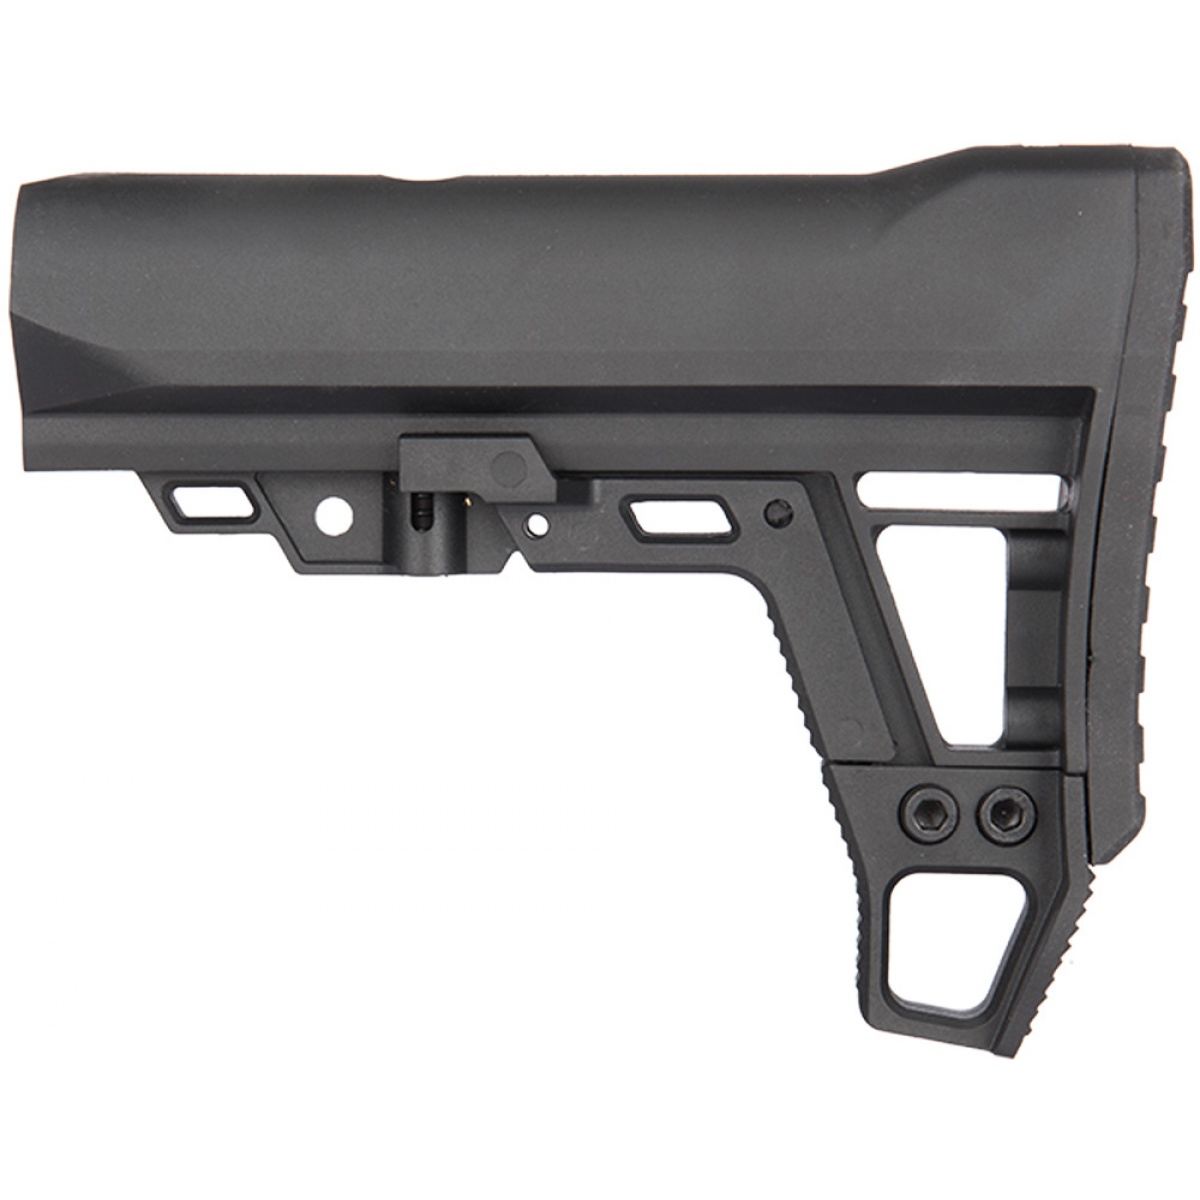 AIMS Stock and Barrel Pouch